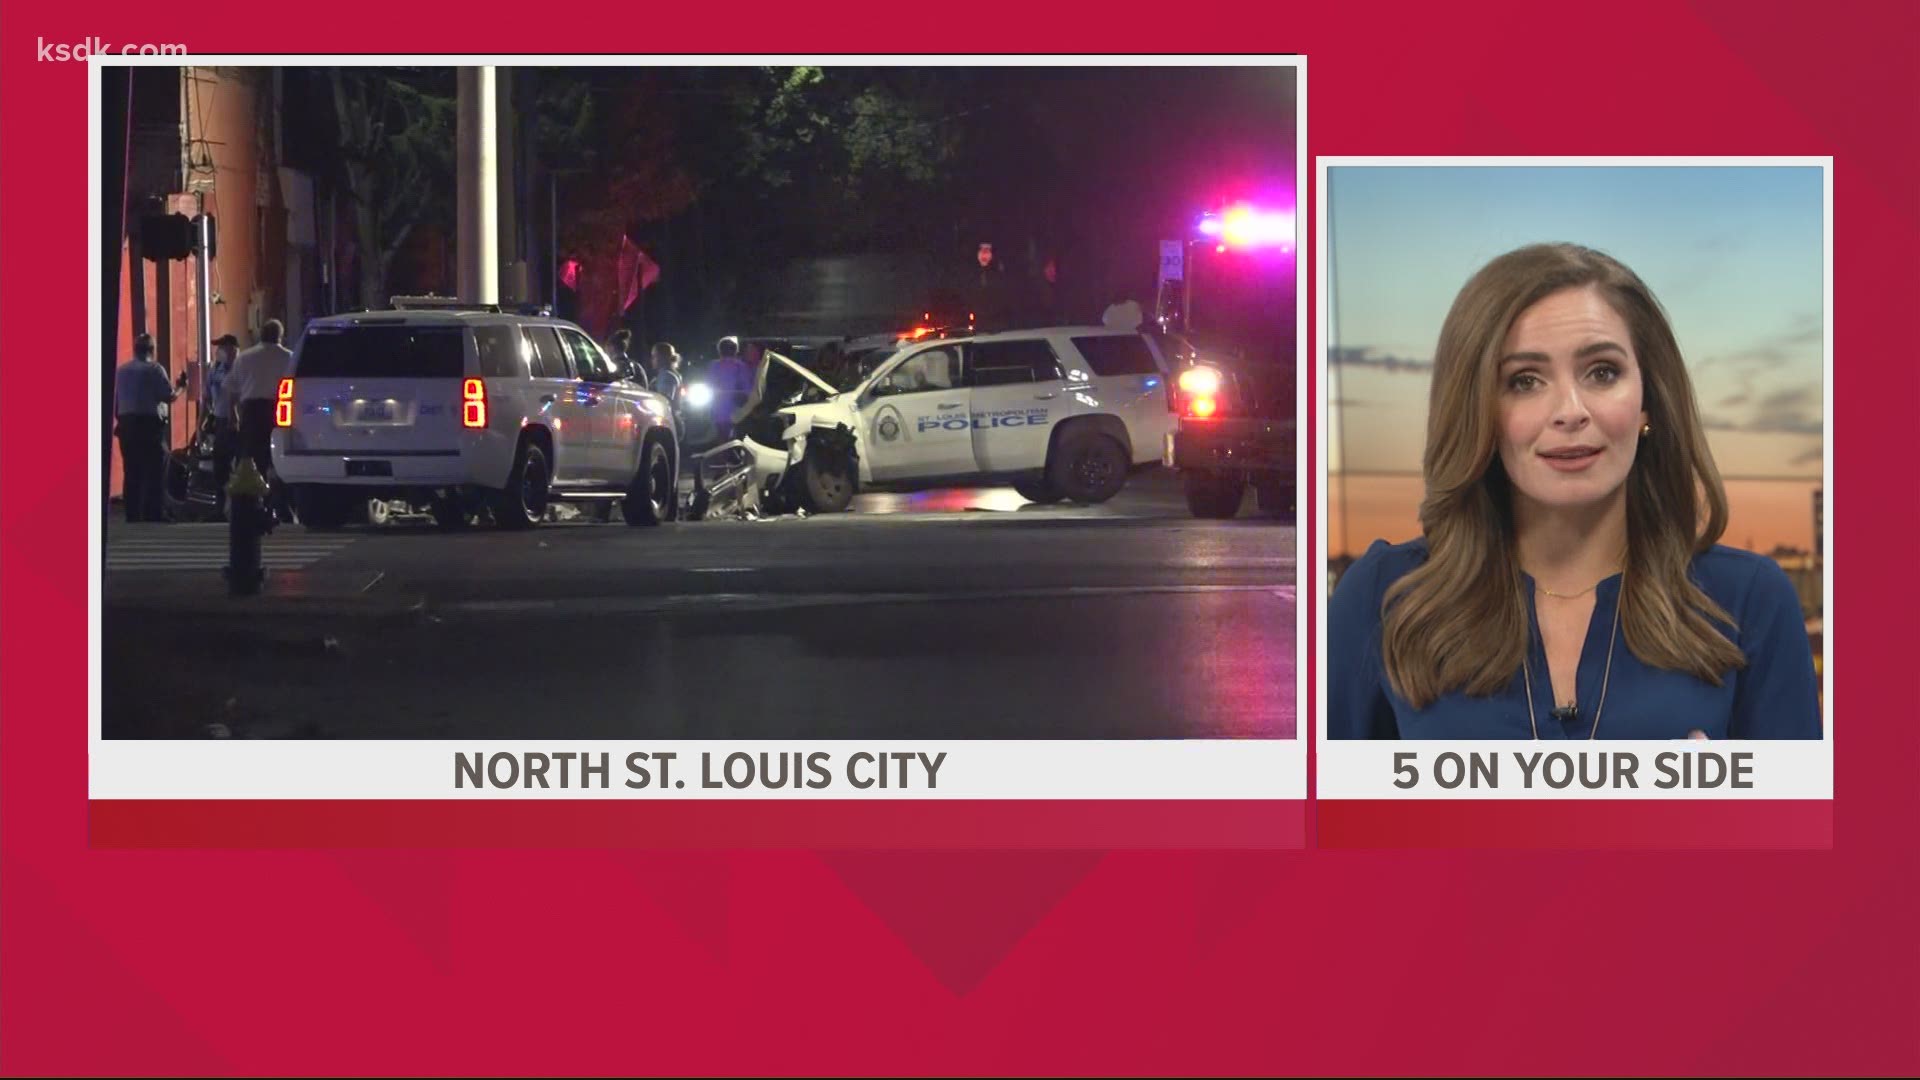 A St. Louis police officer was involved in a crash early Thursday. It happened near Marcus and Natural Bridge just down from Kingshighway.